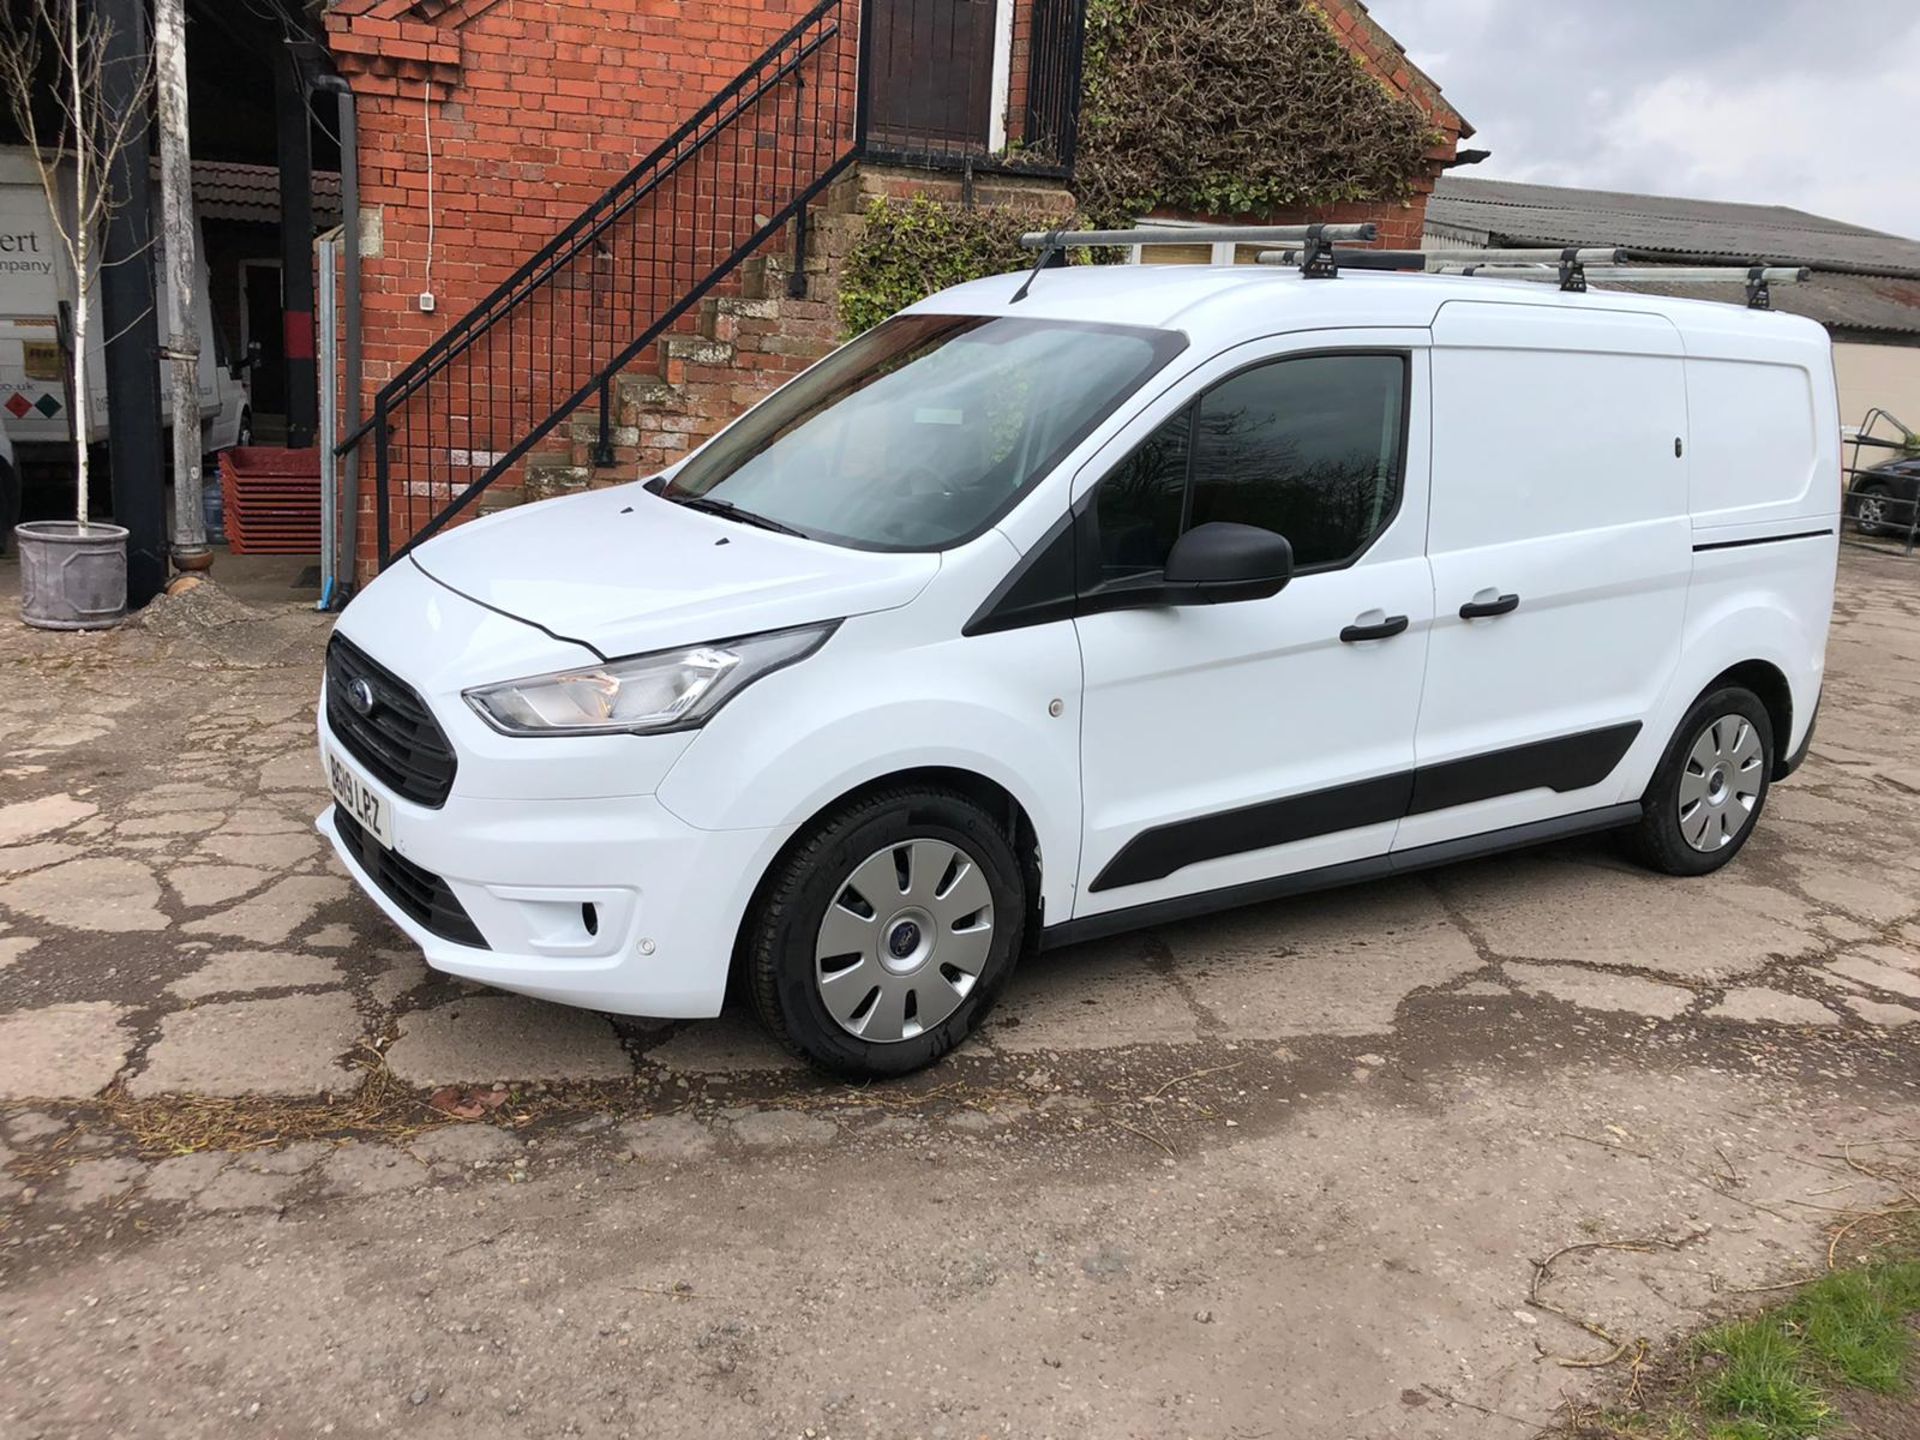 2019/19 REG FORD TRANSIT CONNECT 240 TREND 1.5 DIESEL WHITE PANEL VAN, SHOWING 0 FORMER KEEPERS - Image 3 of 14